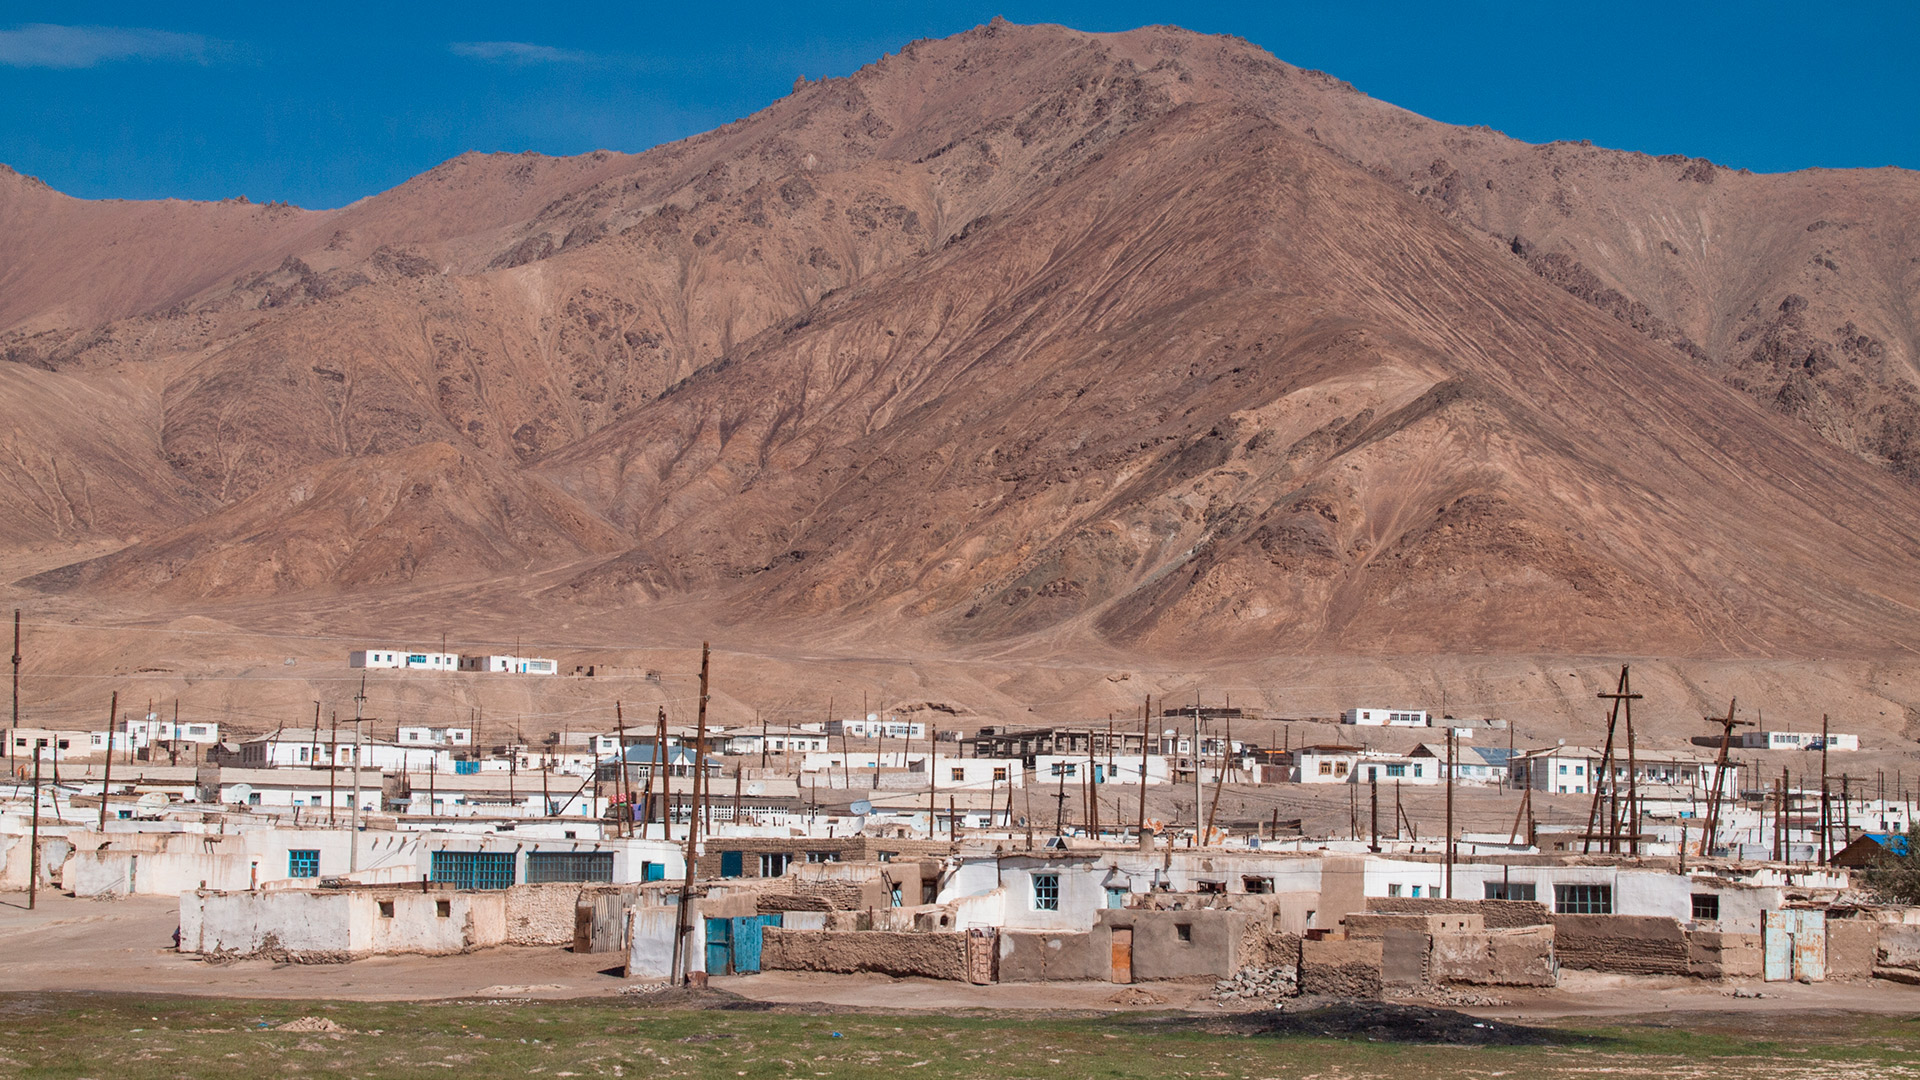 Eastern part of the Pamirs is highland desert plateau. Murghab is the largest Tajik settlement in the region.